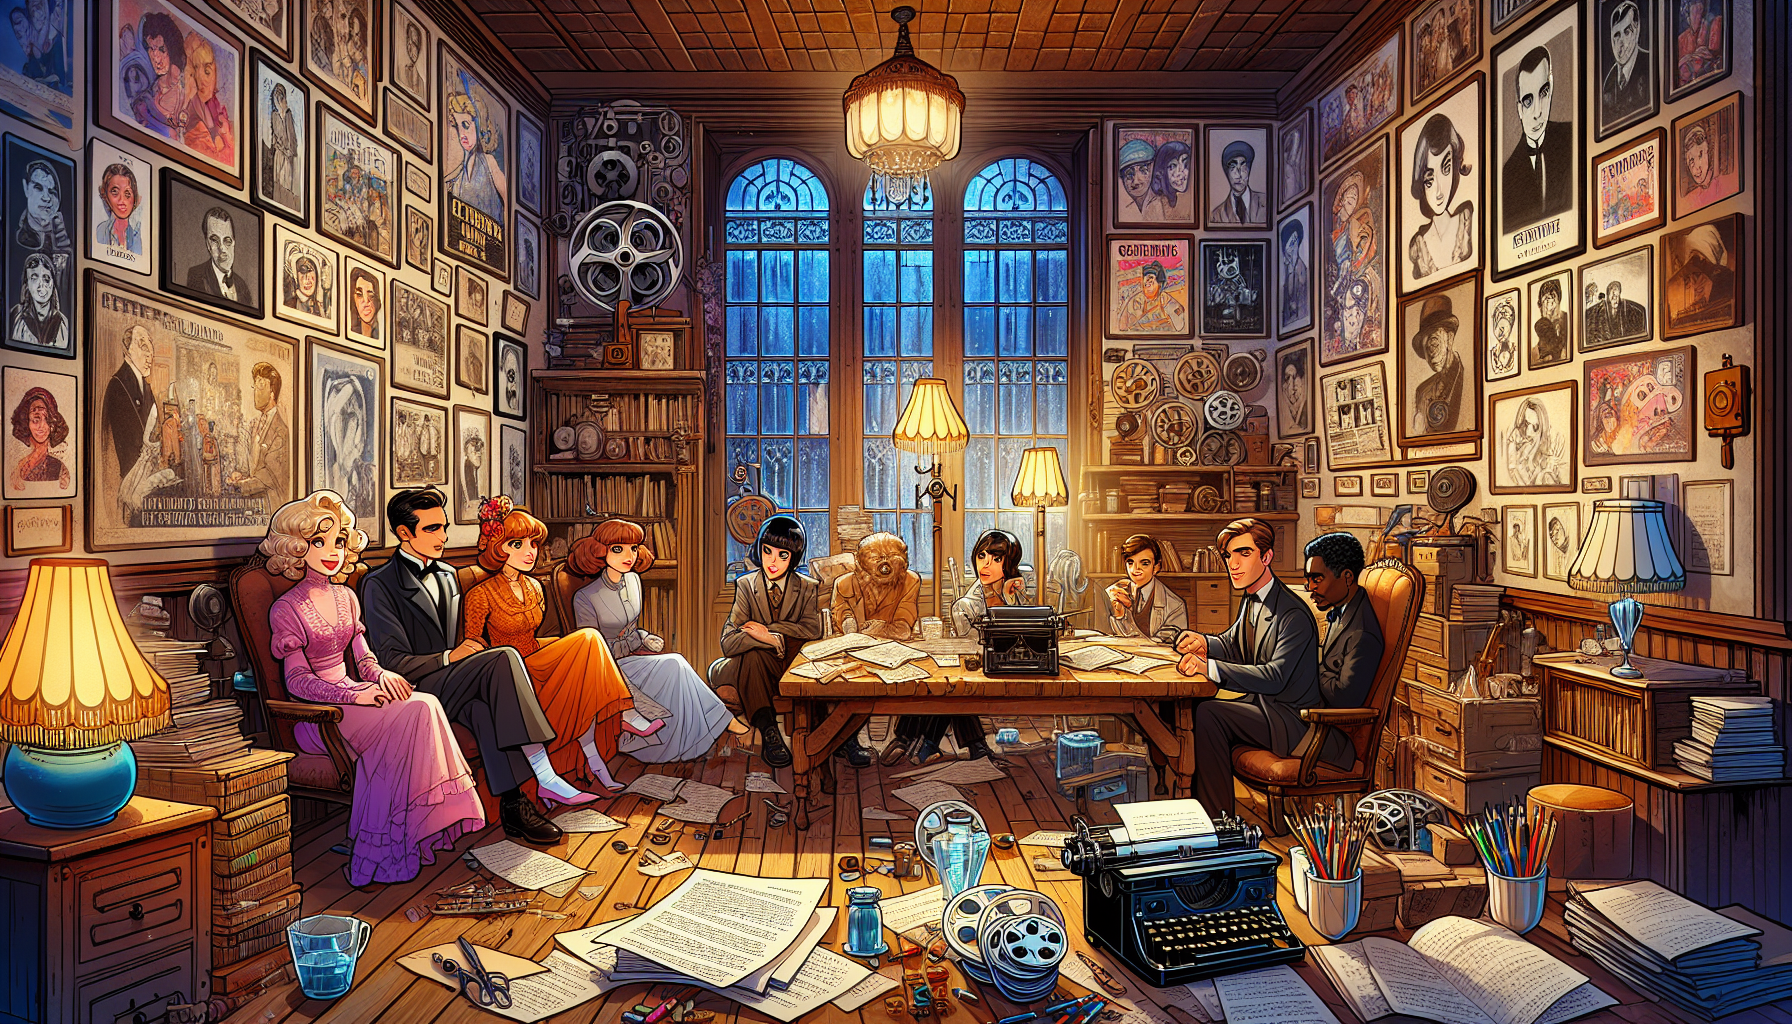 An enchanting illustration of a cozy, dimly-lit vintage study room filled with classic animated film posters on the walls, with a diverse group of animated characters of various styles sitting togethe